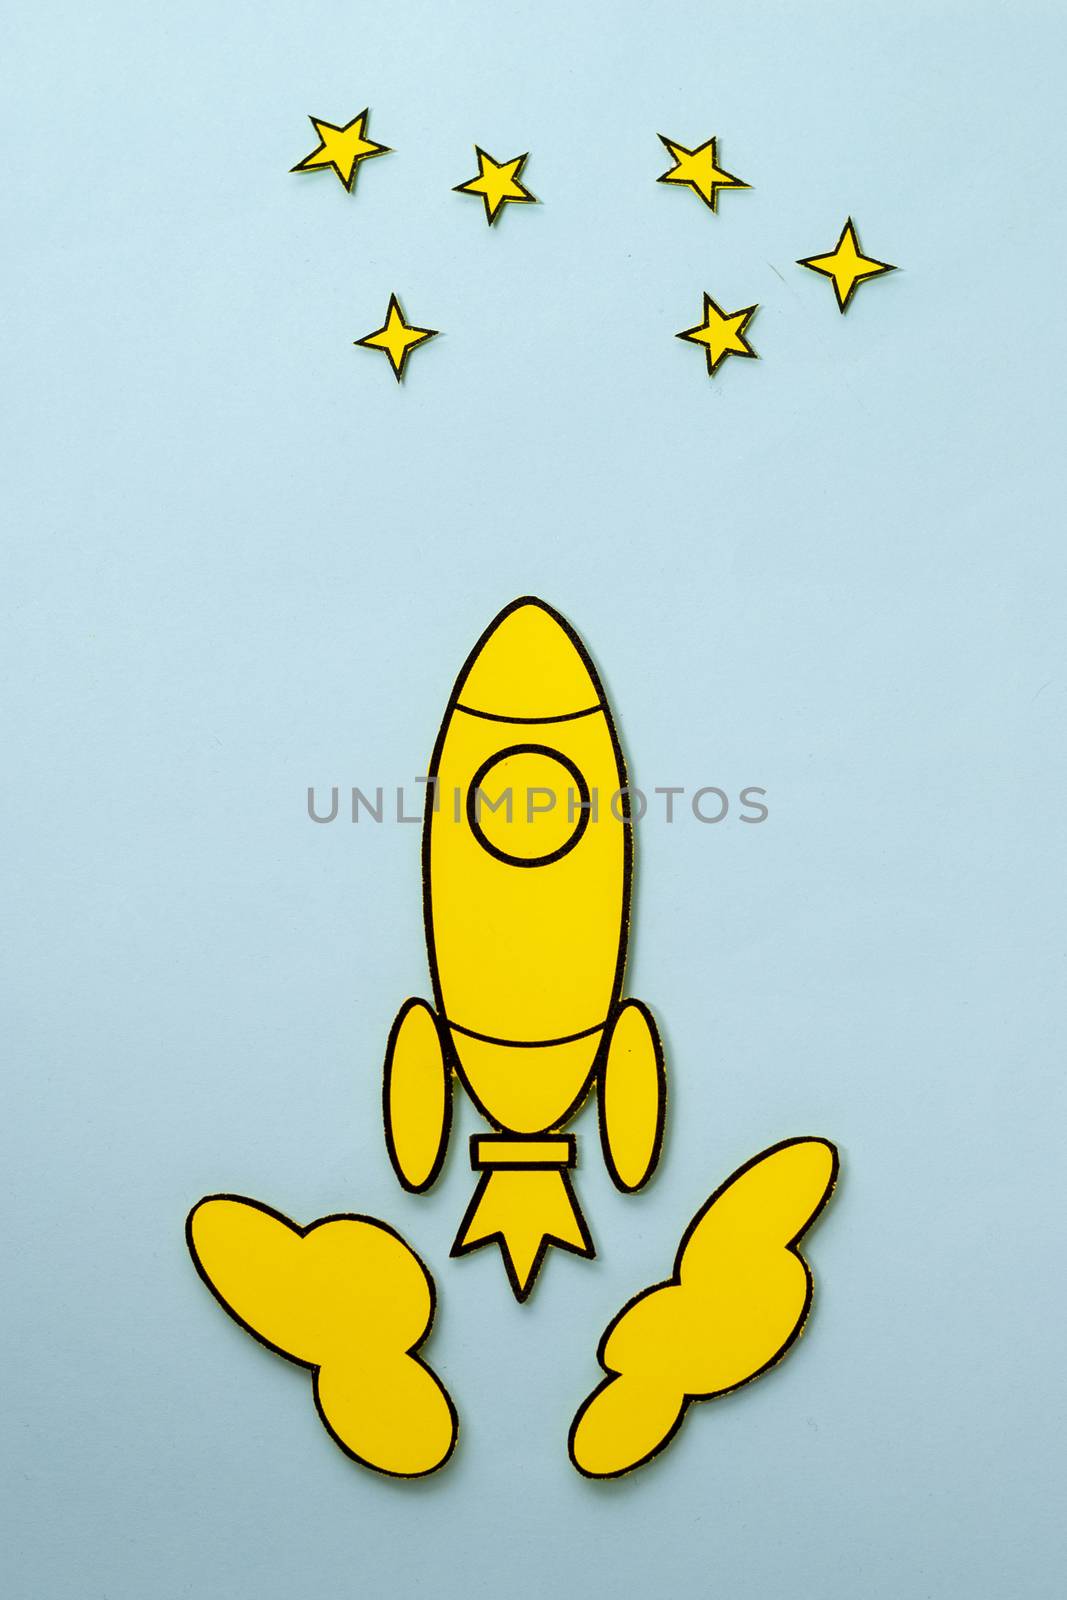 Yellow cartoon rocket flying to the stars zooming through space between the clouds over a blue background with copy space